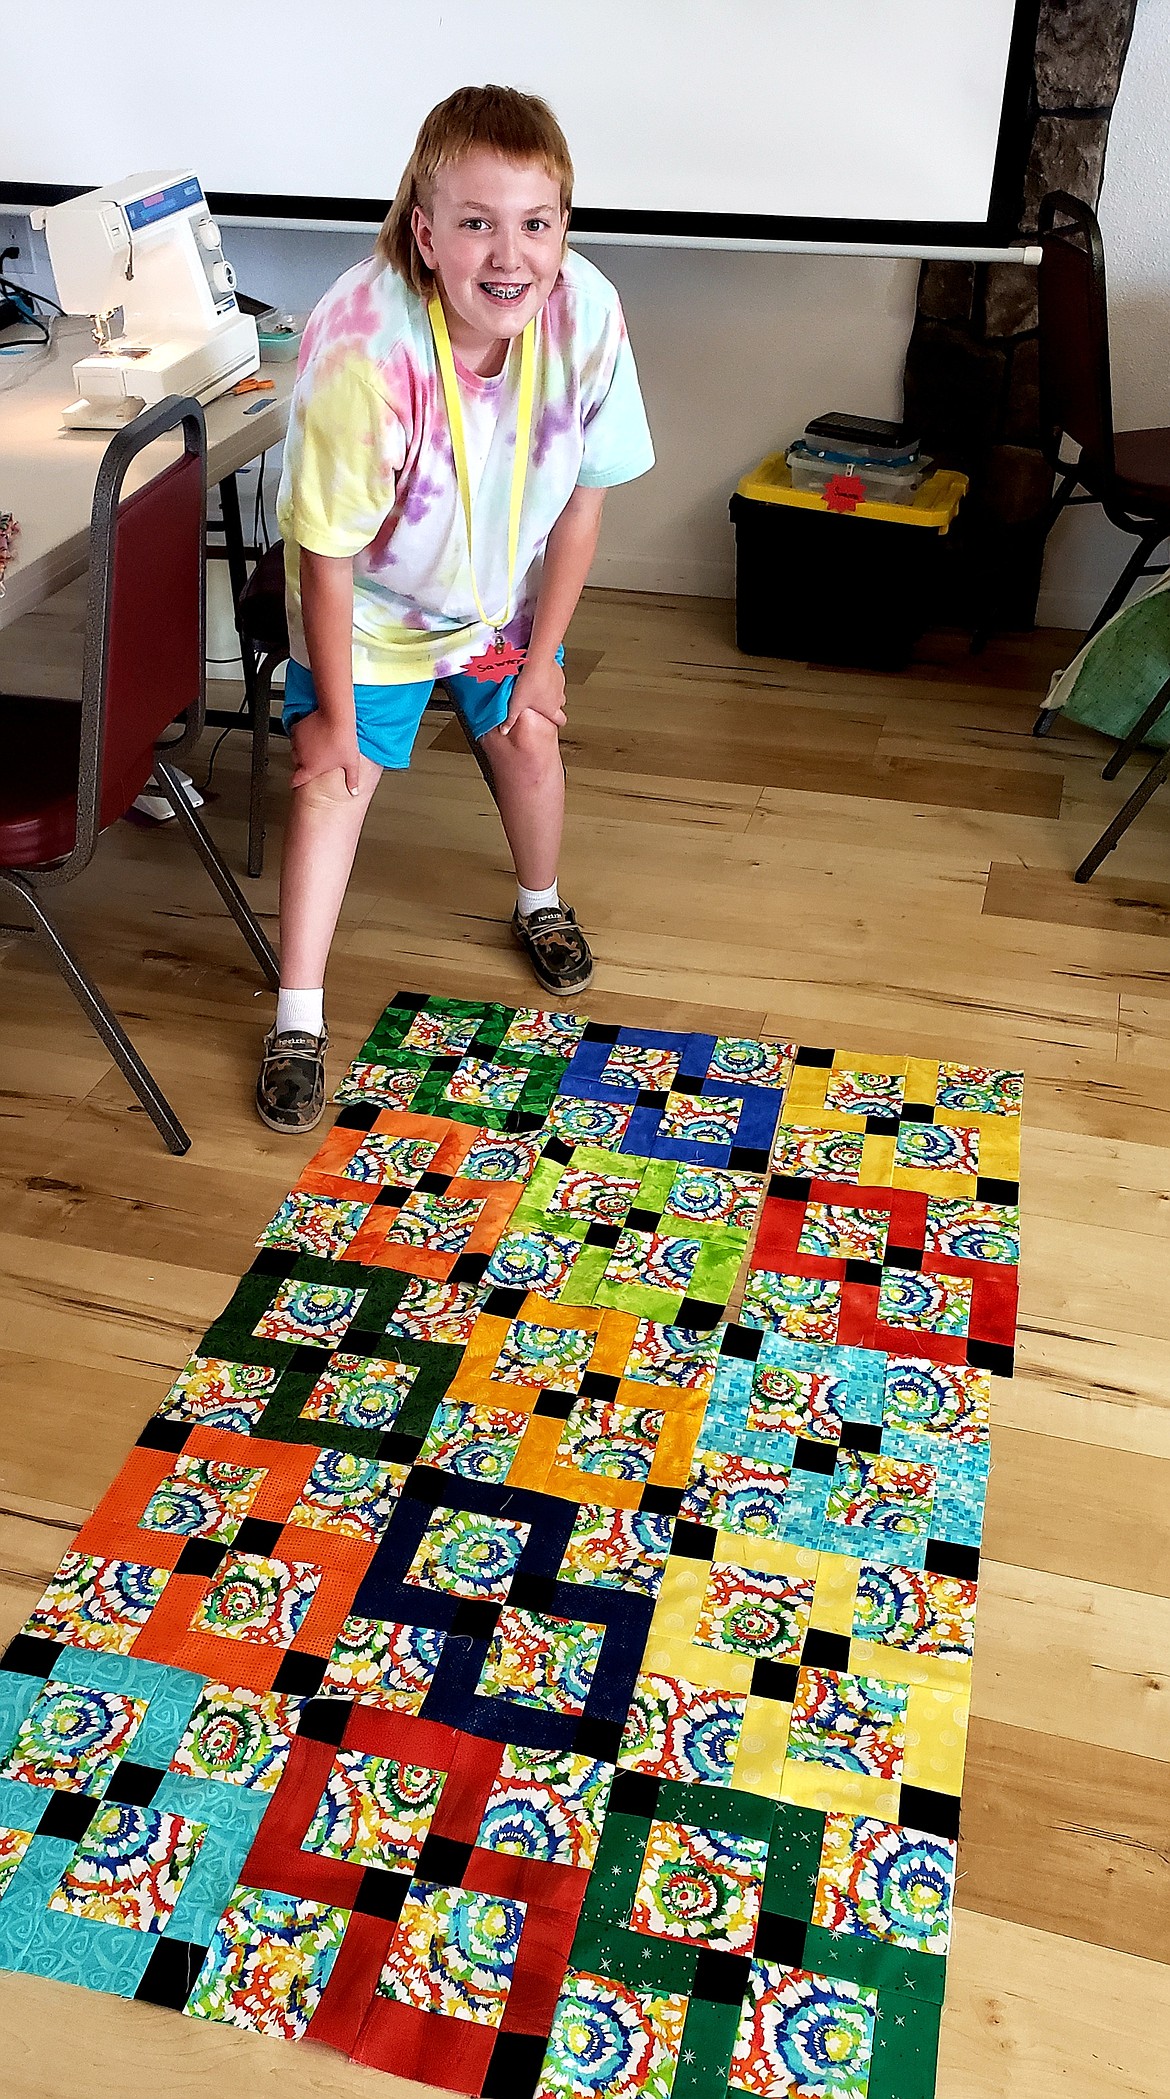 Sawyer Combs, 12, arranges the blocks for his quilt at Quilt Camp. He loves color, the brighter the better.